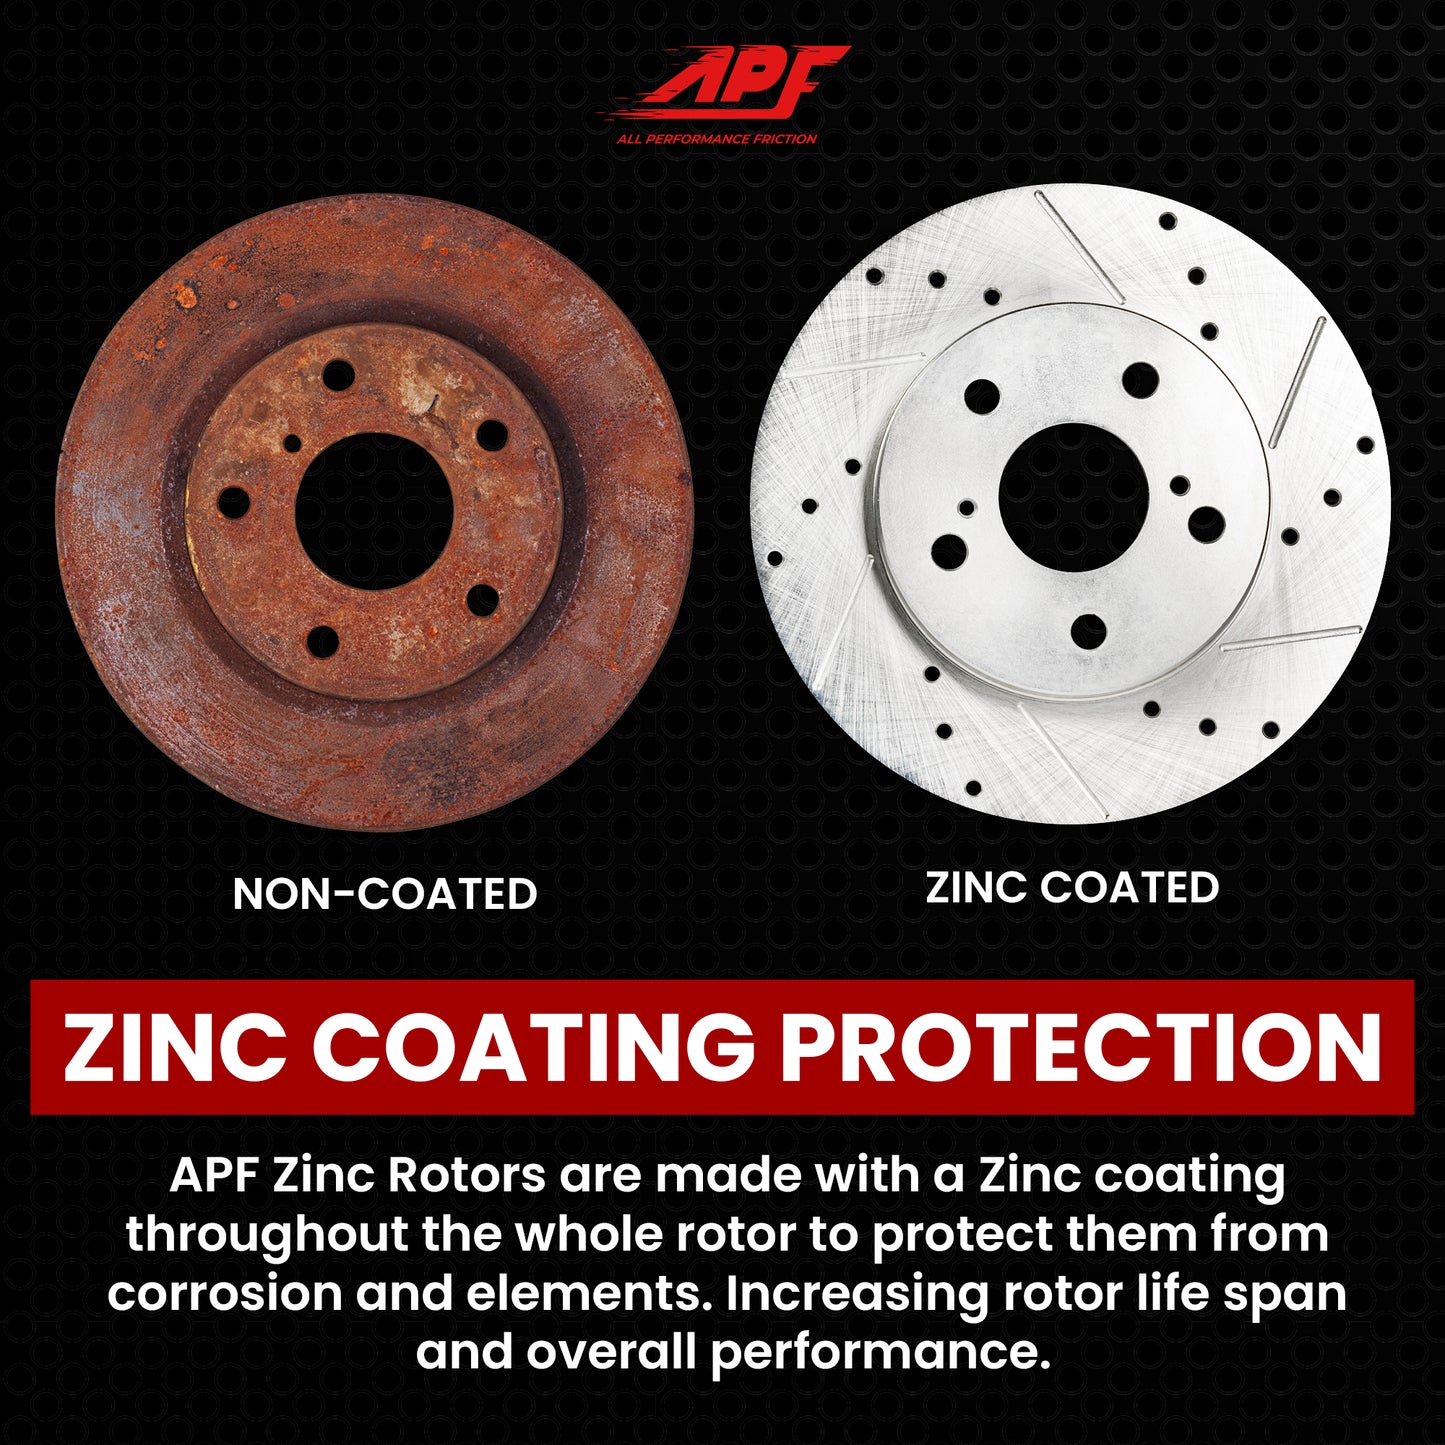 APF All Performance Friction Rear Rotors compatible with Nissan Altima 2002-2019 Zinc Drilled Slotted Rotors | $95.73